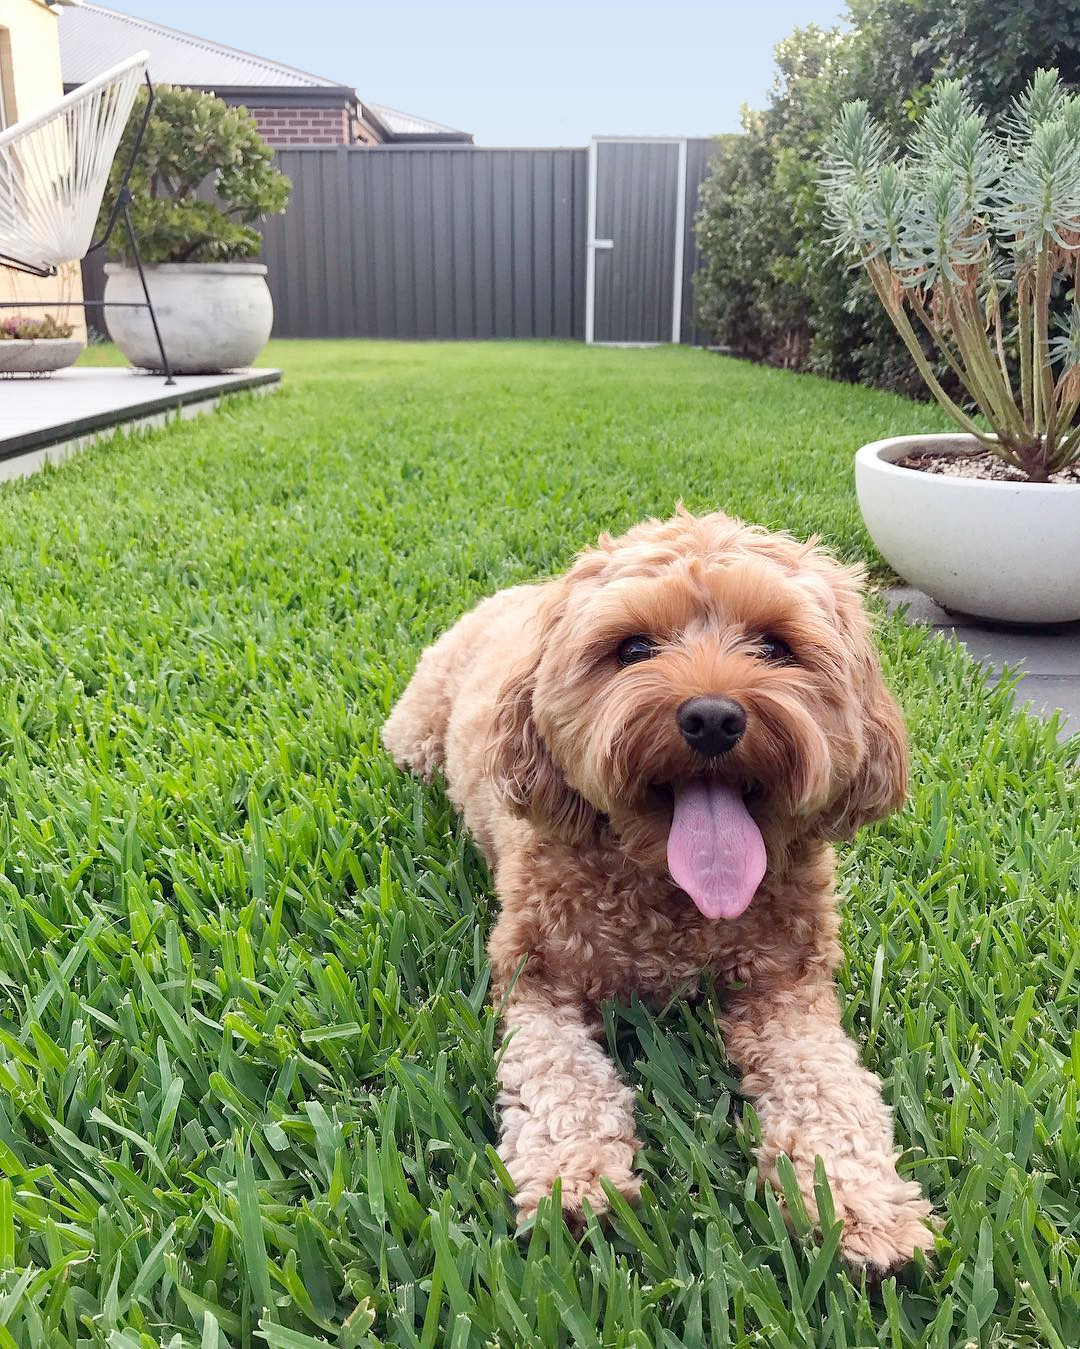 8 Backyard Ideas for Dogs - Dog-Friendly Landscapes